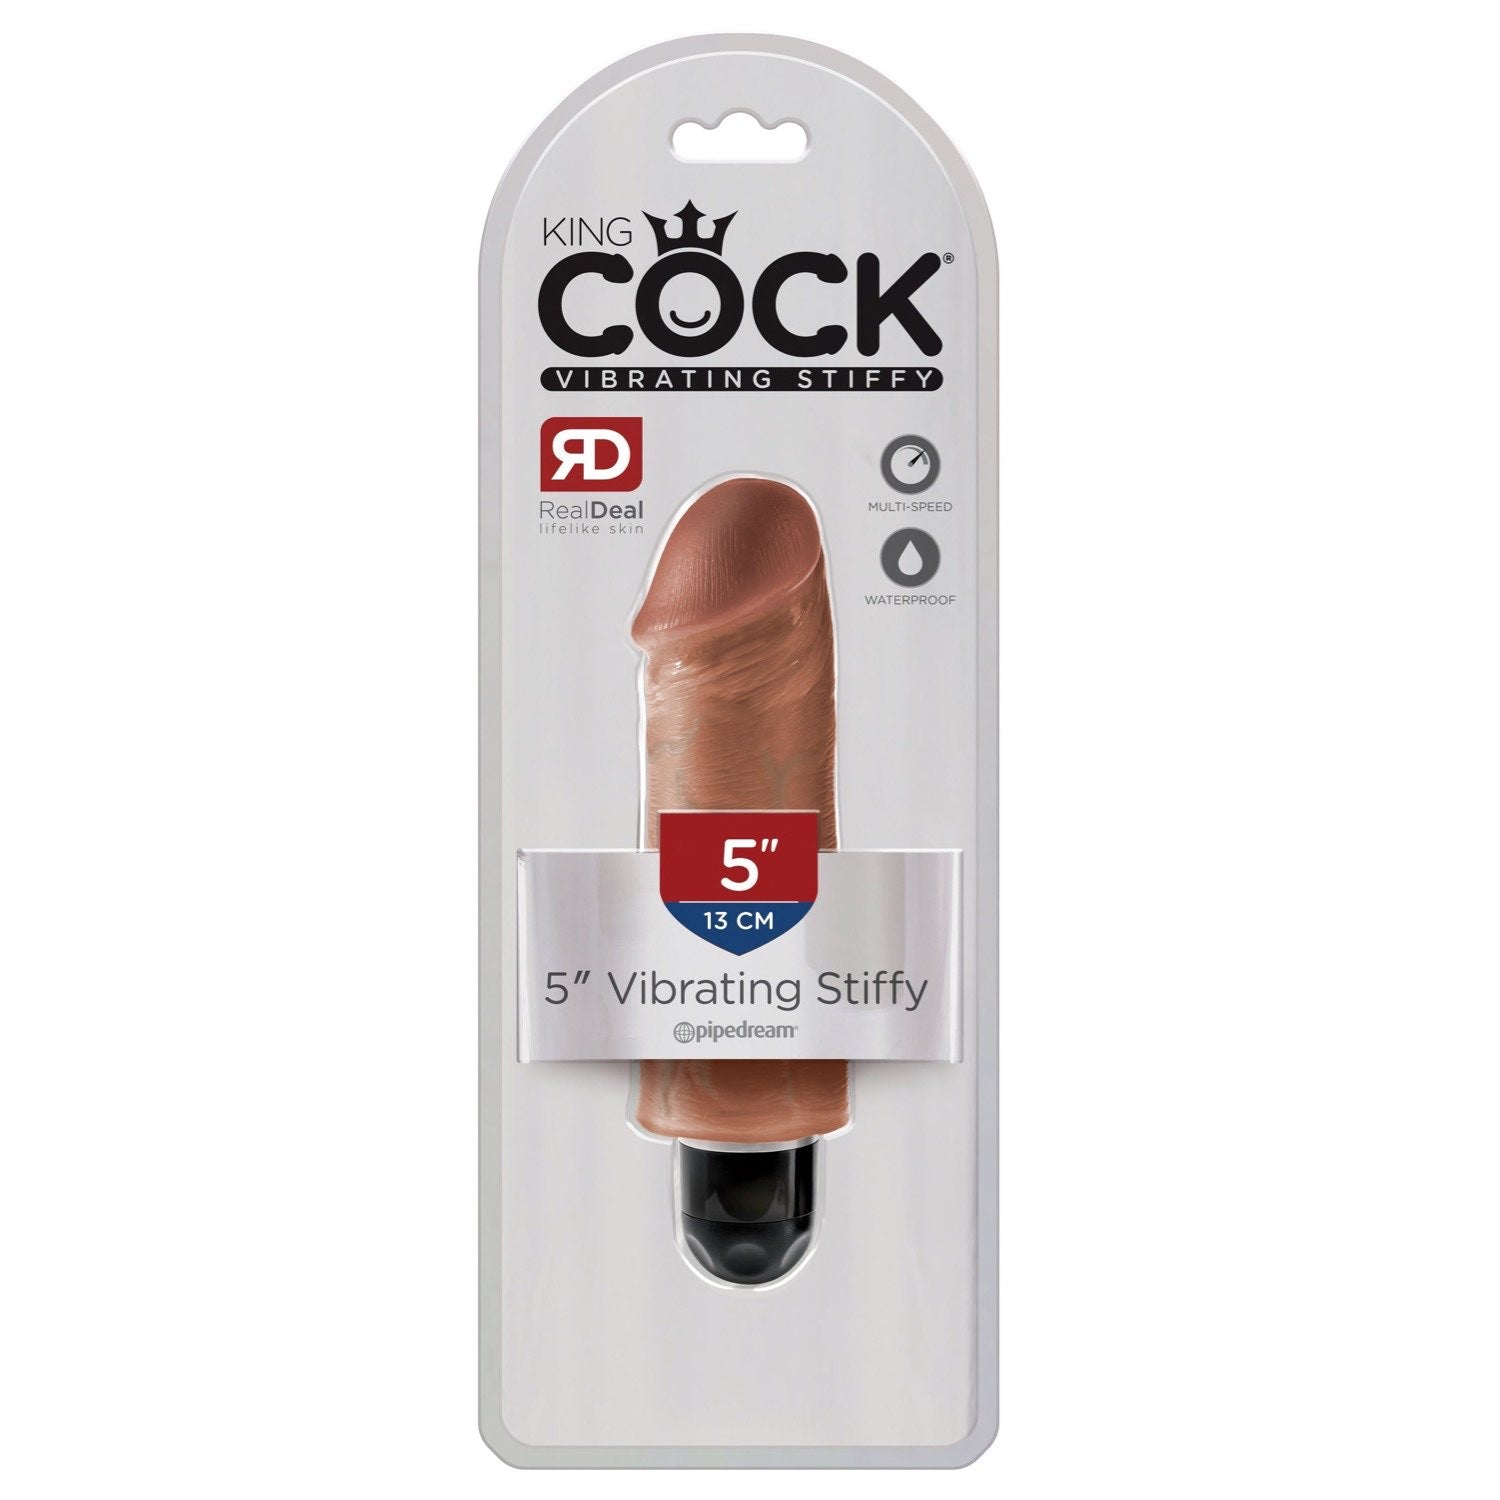 King Cock 5IN Vibrating Stiffy - Tan by Pipedream